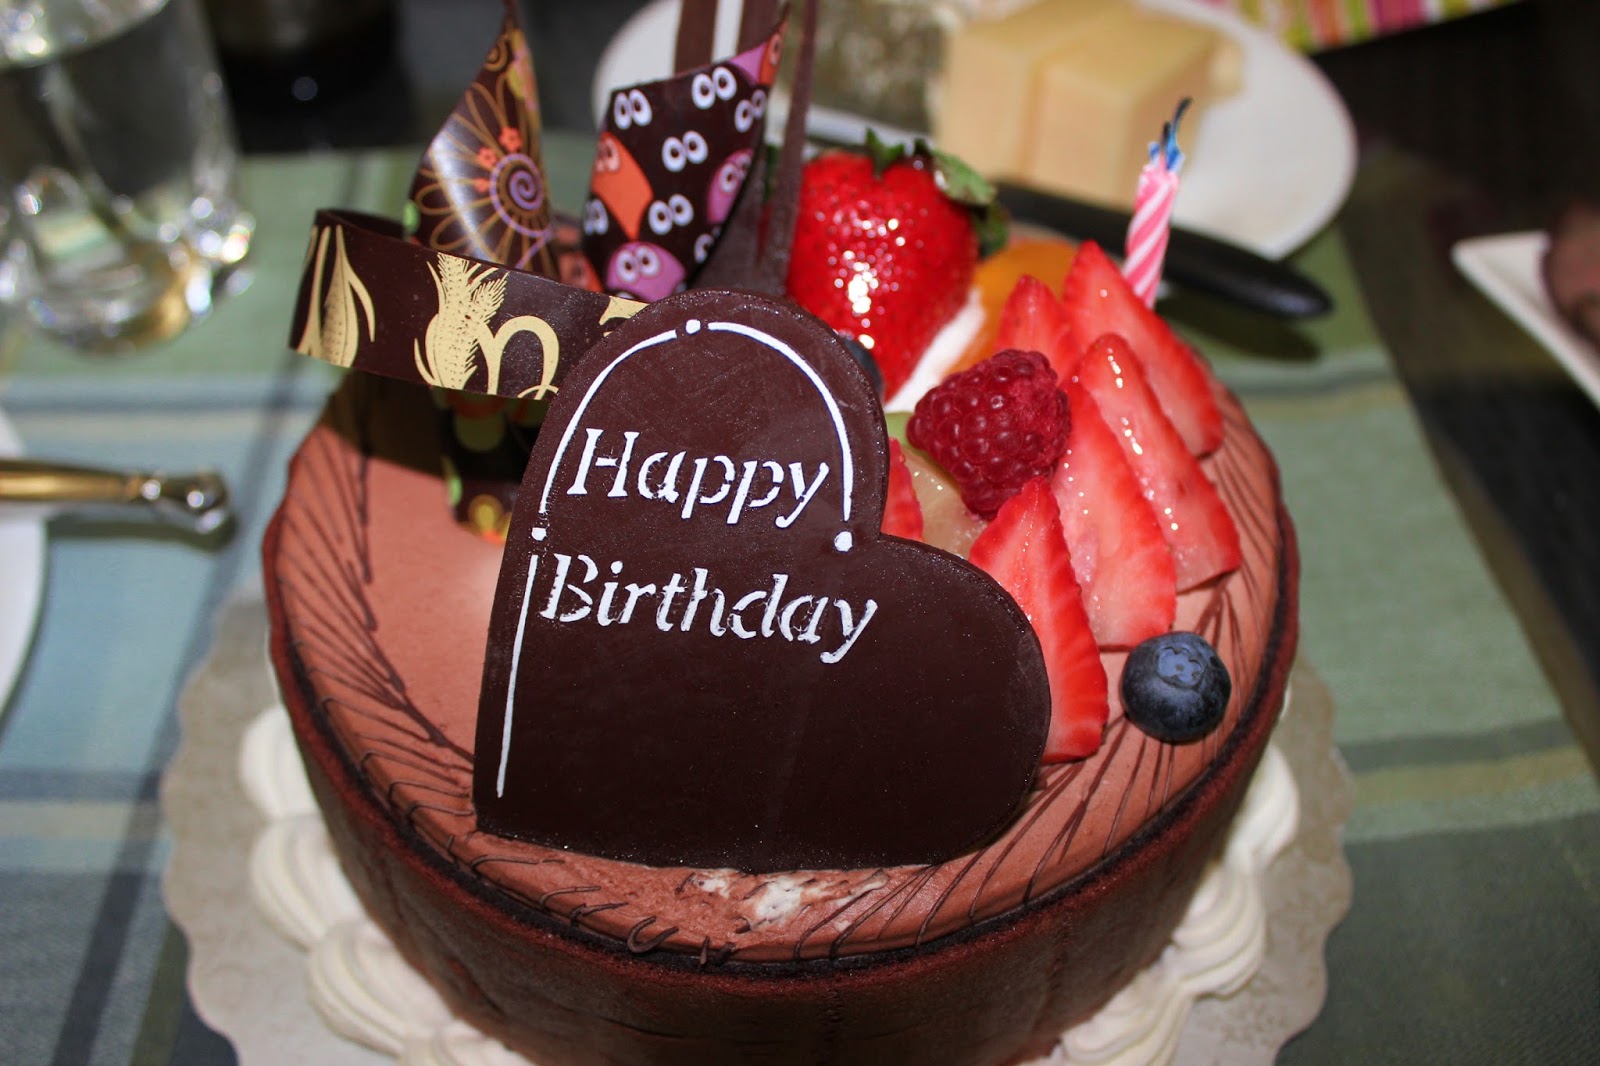 Top # 100 + Happy Birthday Cake Images - Pictures - Wallpapers - Pics